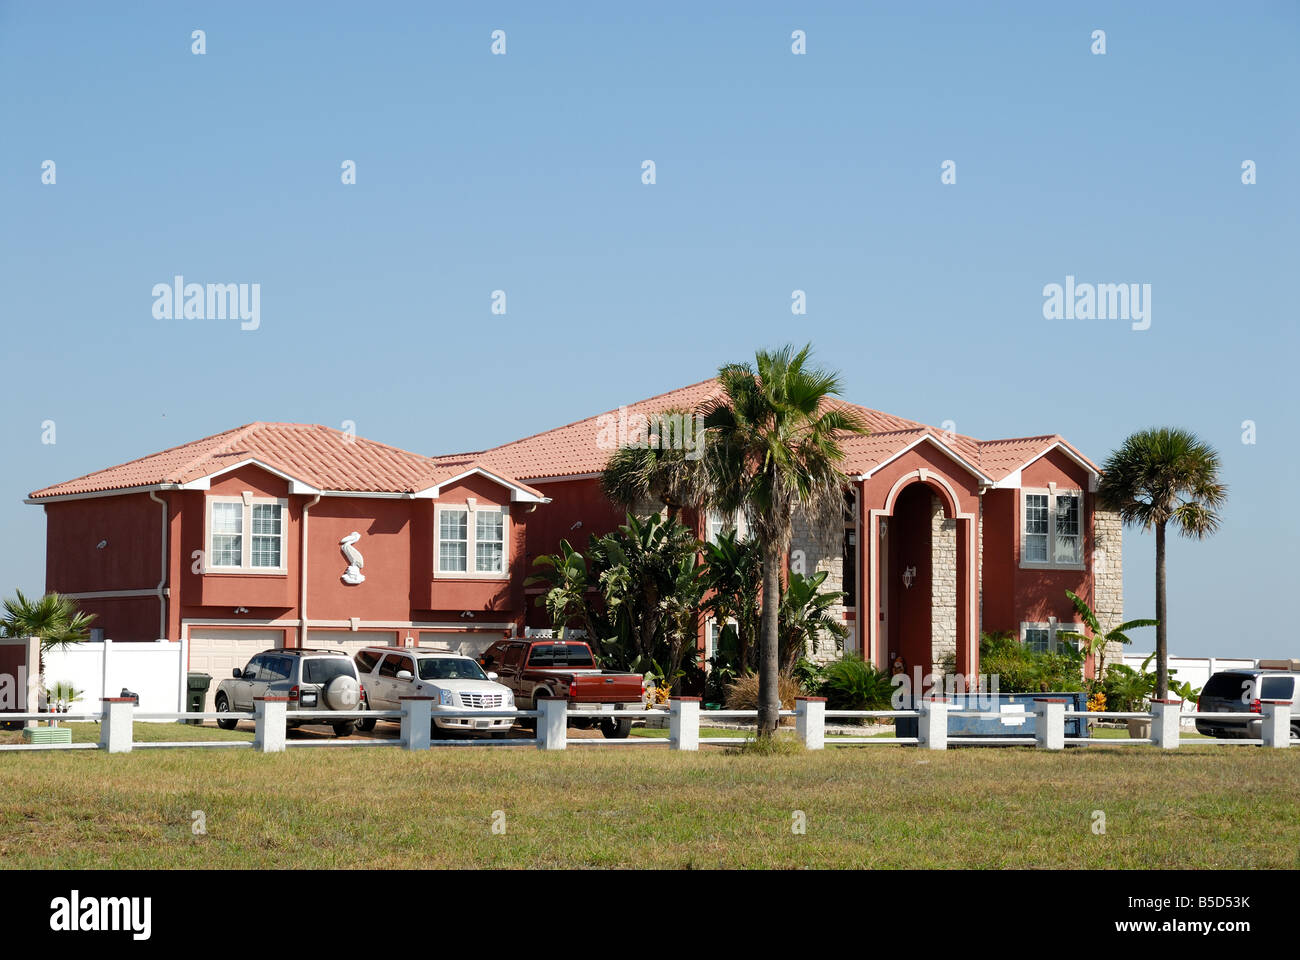 Beatiful villa in the southern United States Stock Photo